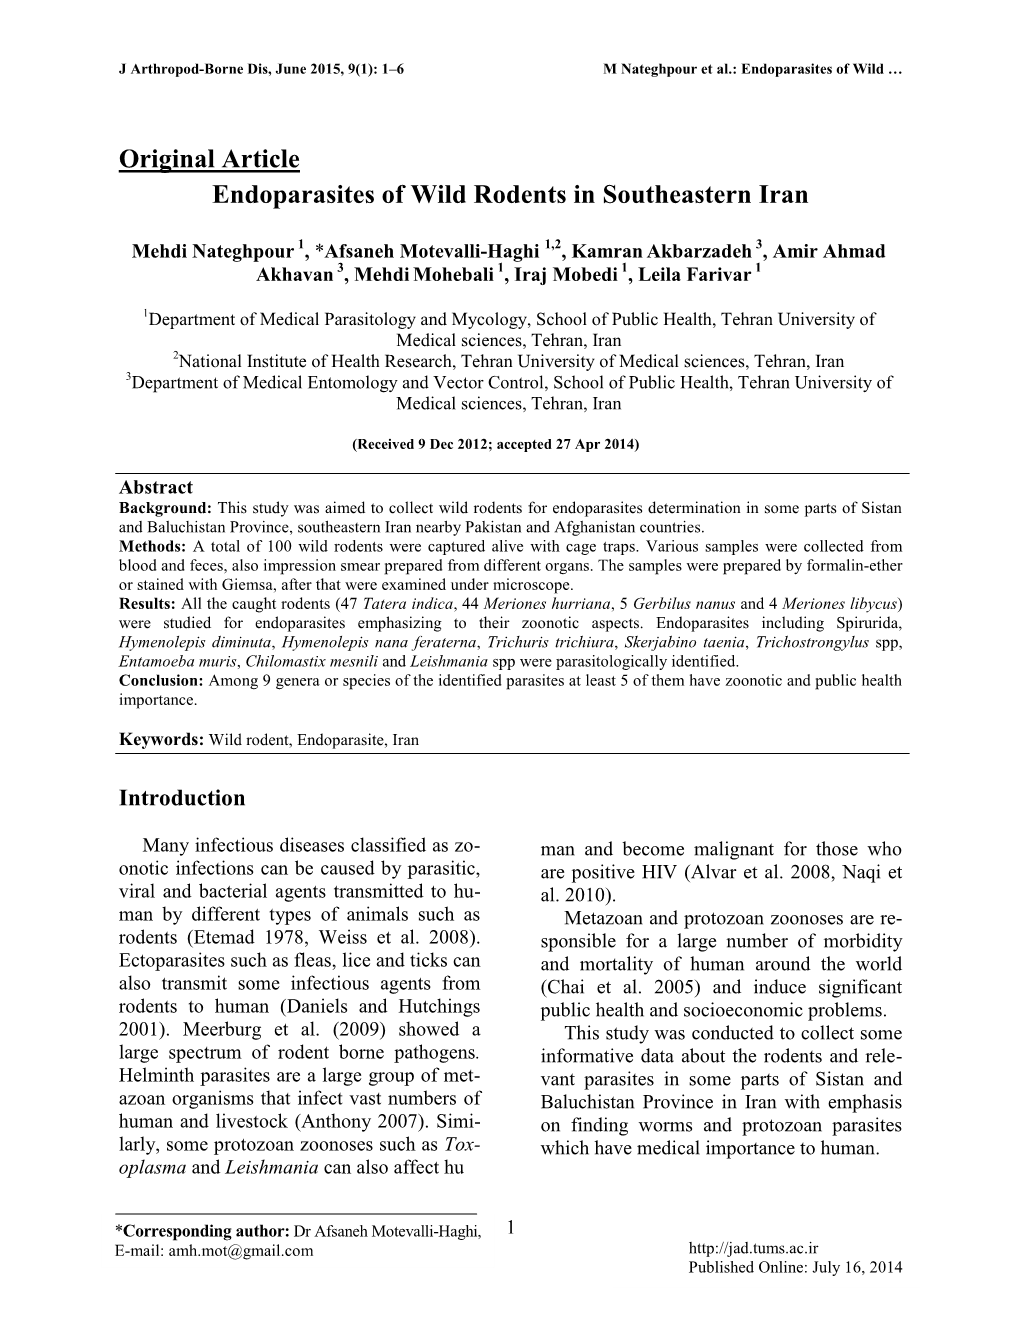 Original Article Endoparasites of Wild Rodents in Southeastern Iran